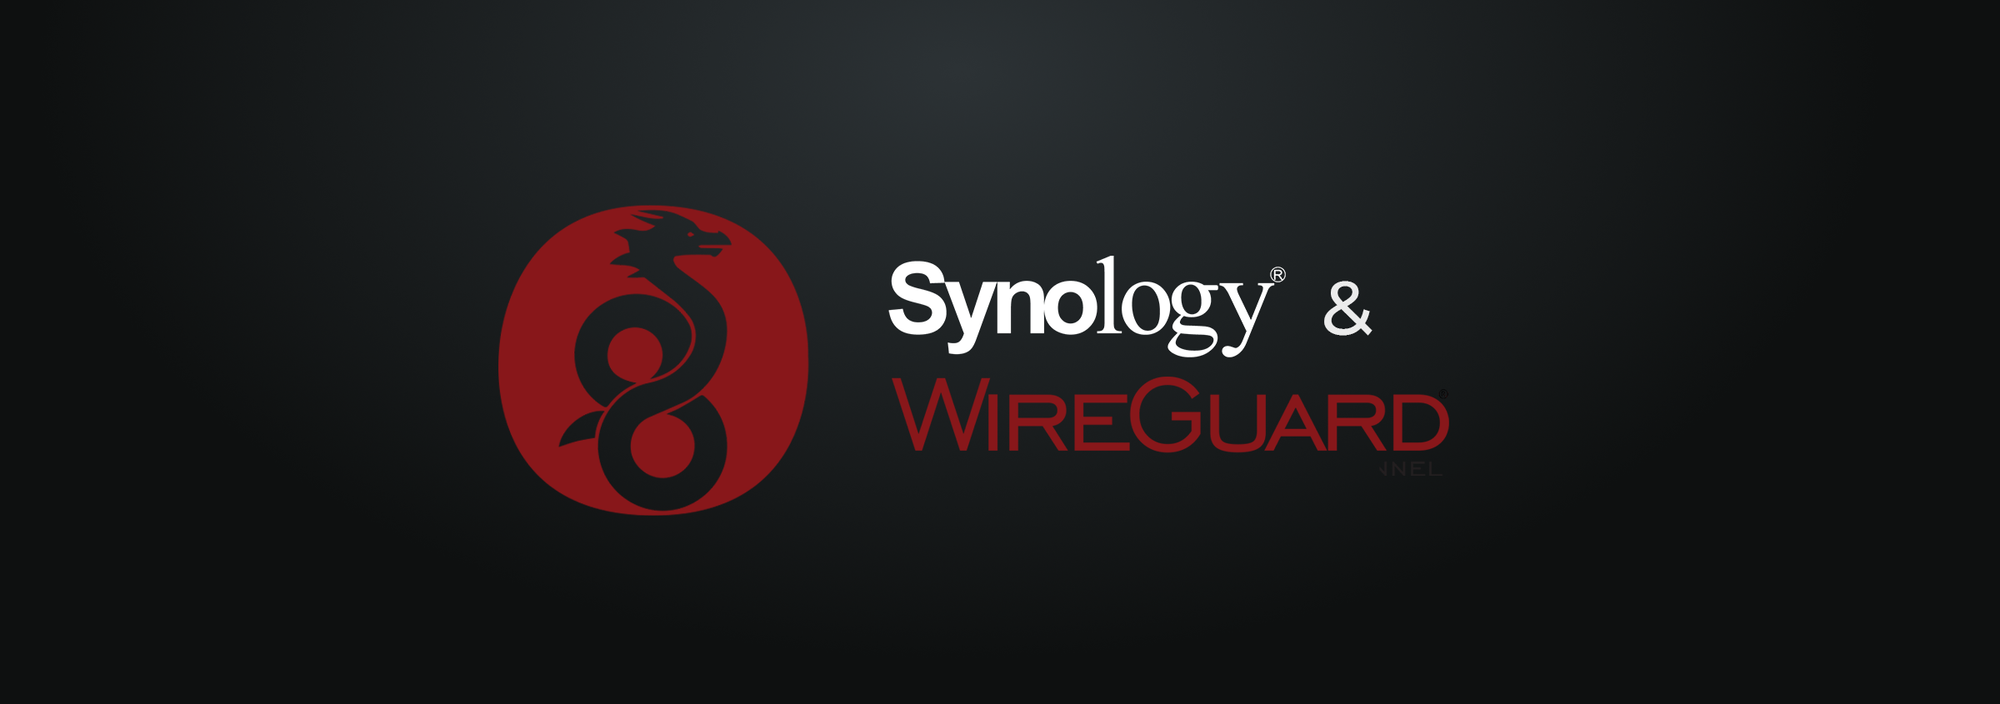 Install Wireguard on your Synology NAS